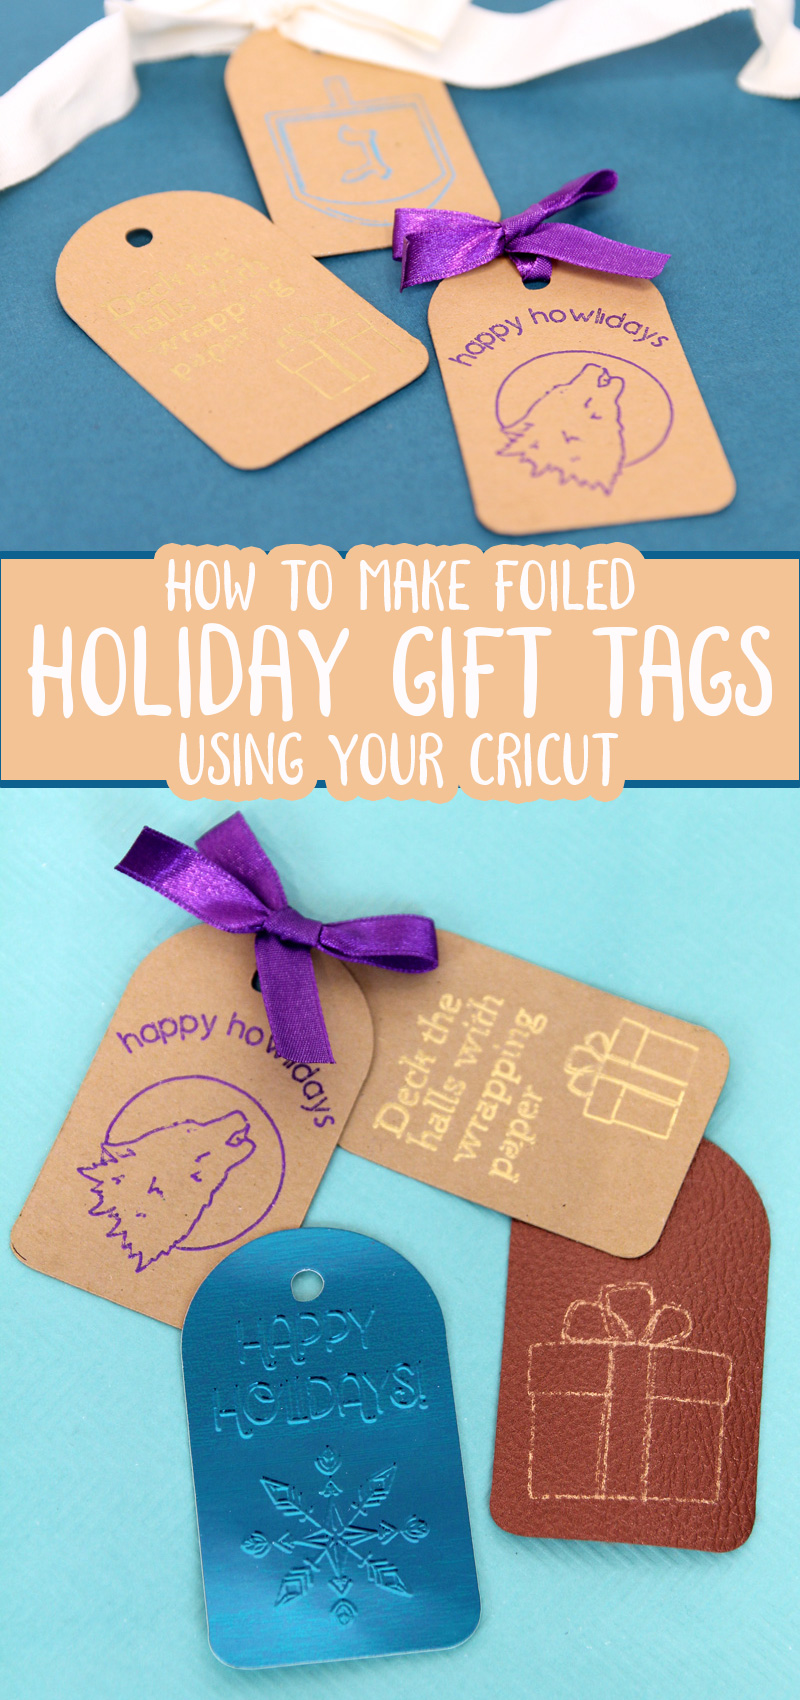 cricut gift tags collage featuring different tags for many holidays